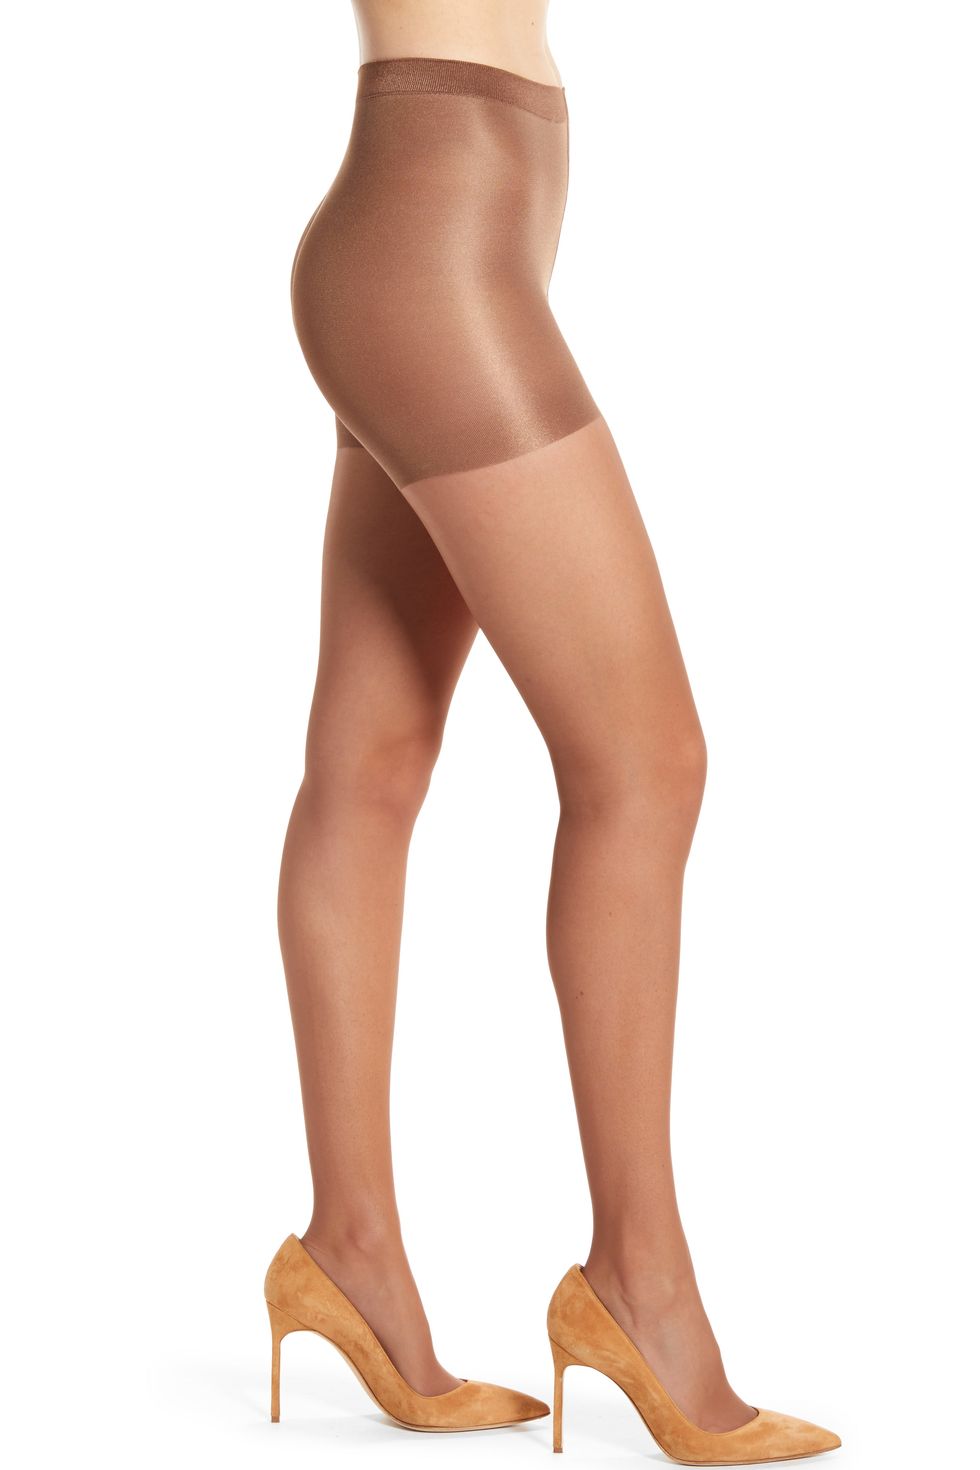 Fashion tip: to avoid unsightly visible panty lines, don't wear any panties  : r/MenInHeels